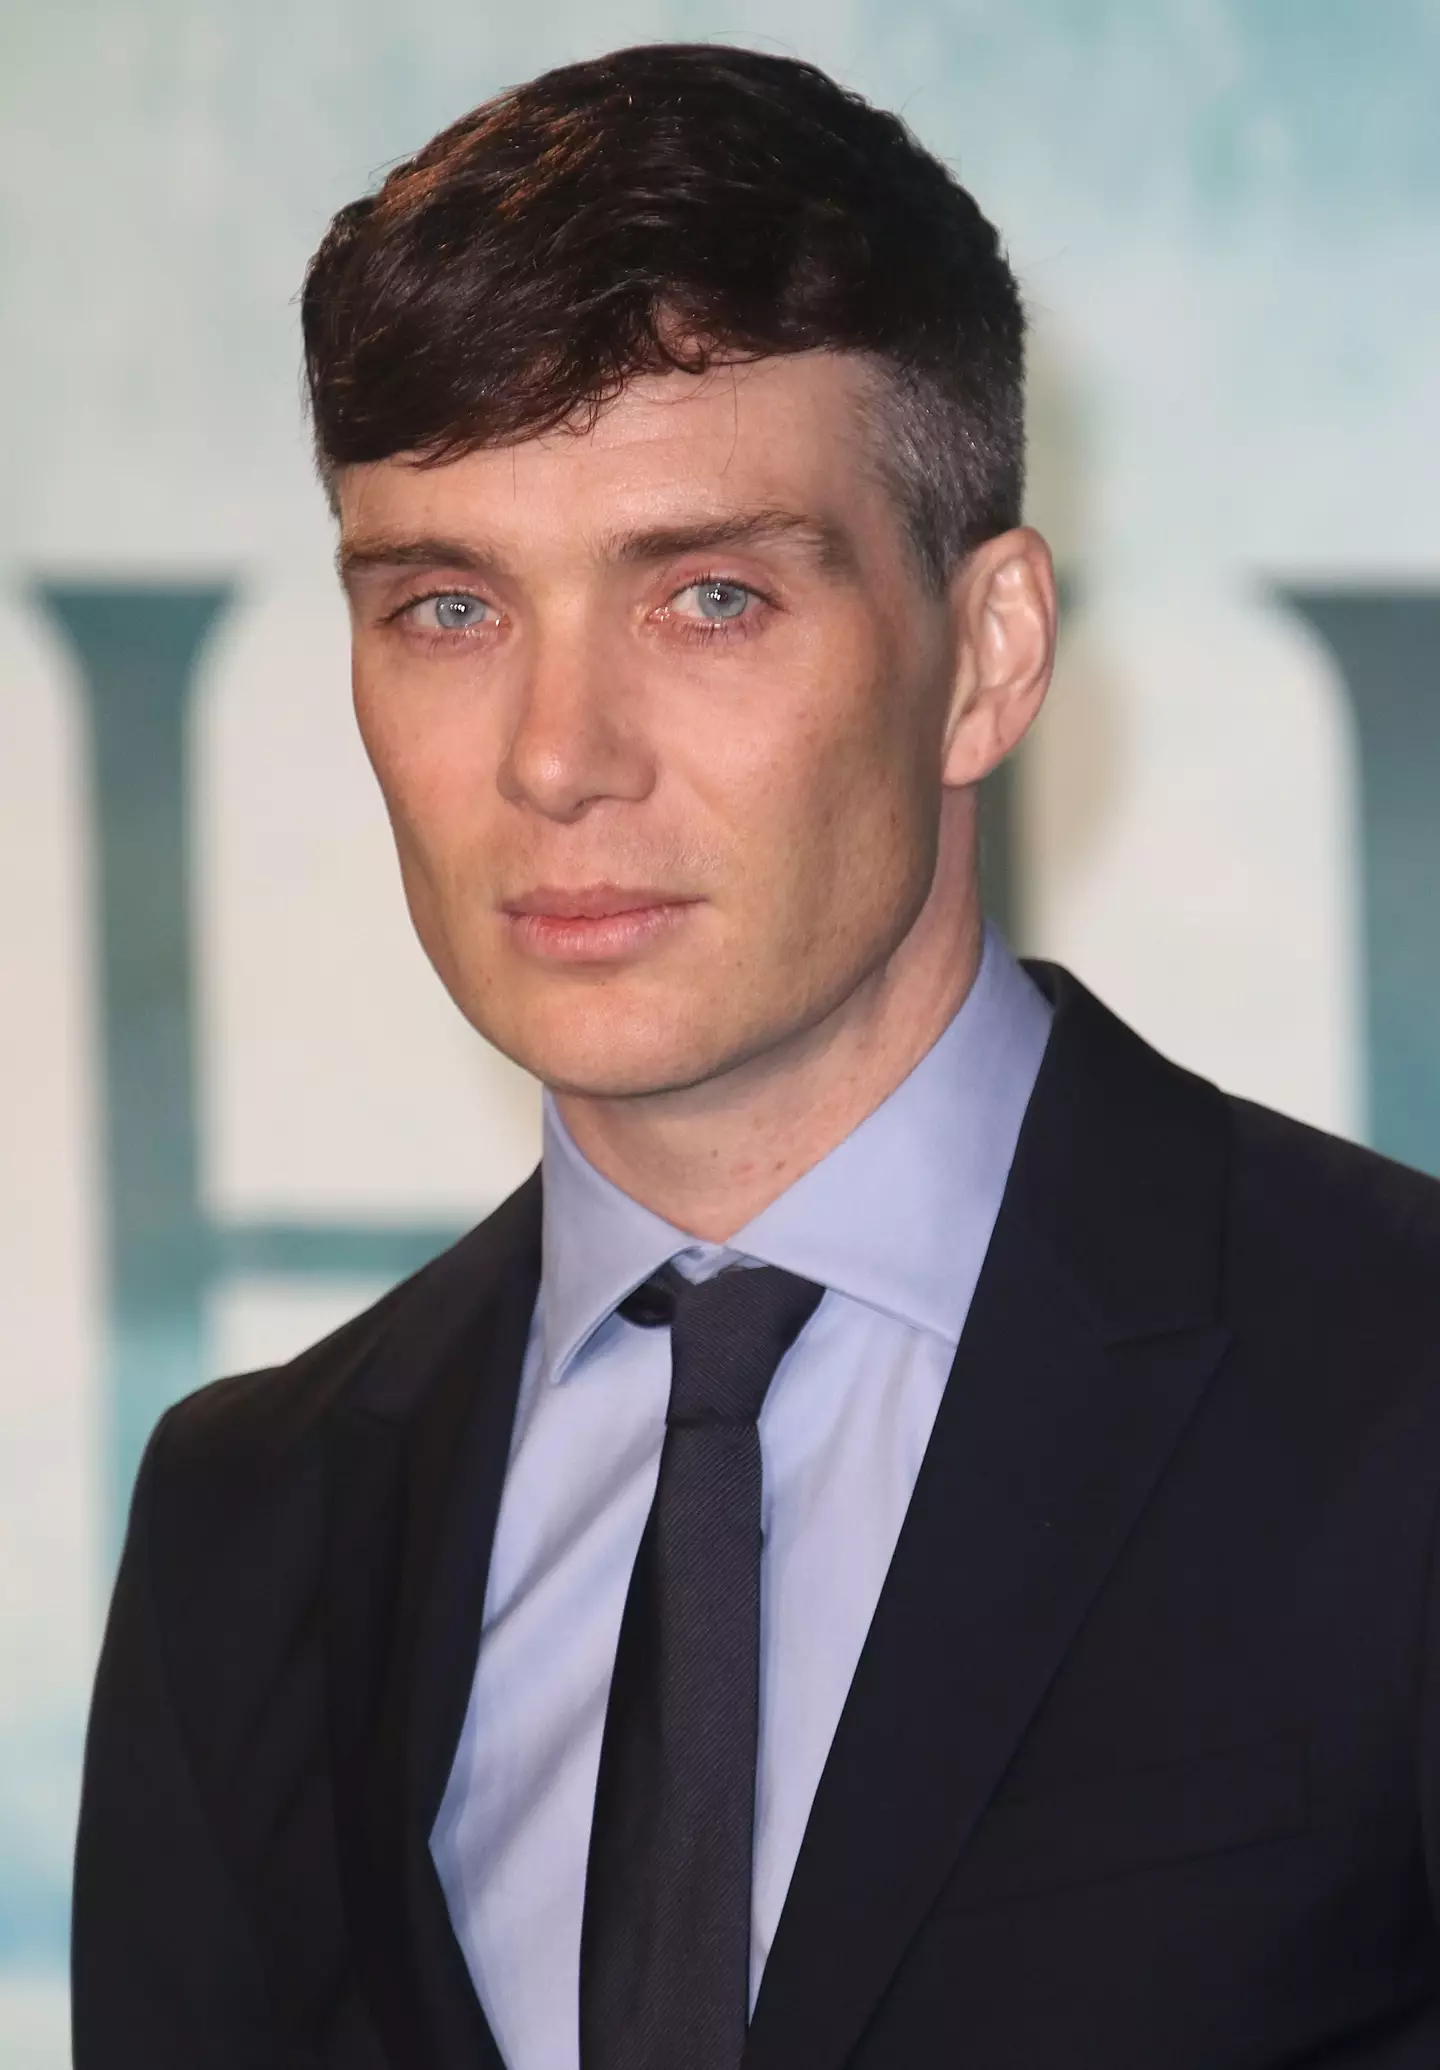 He said fans often expect him to be like Tommy Shelby.